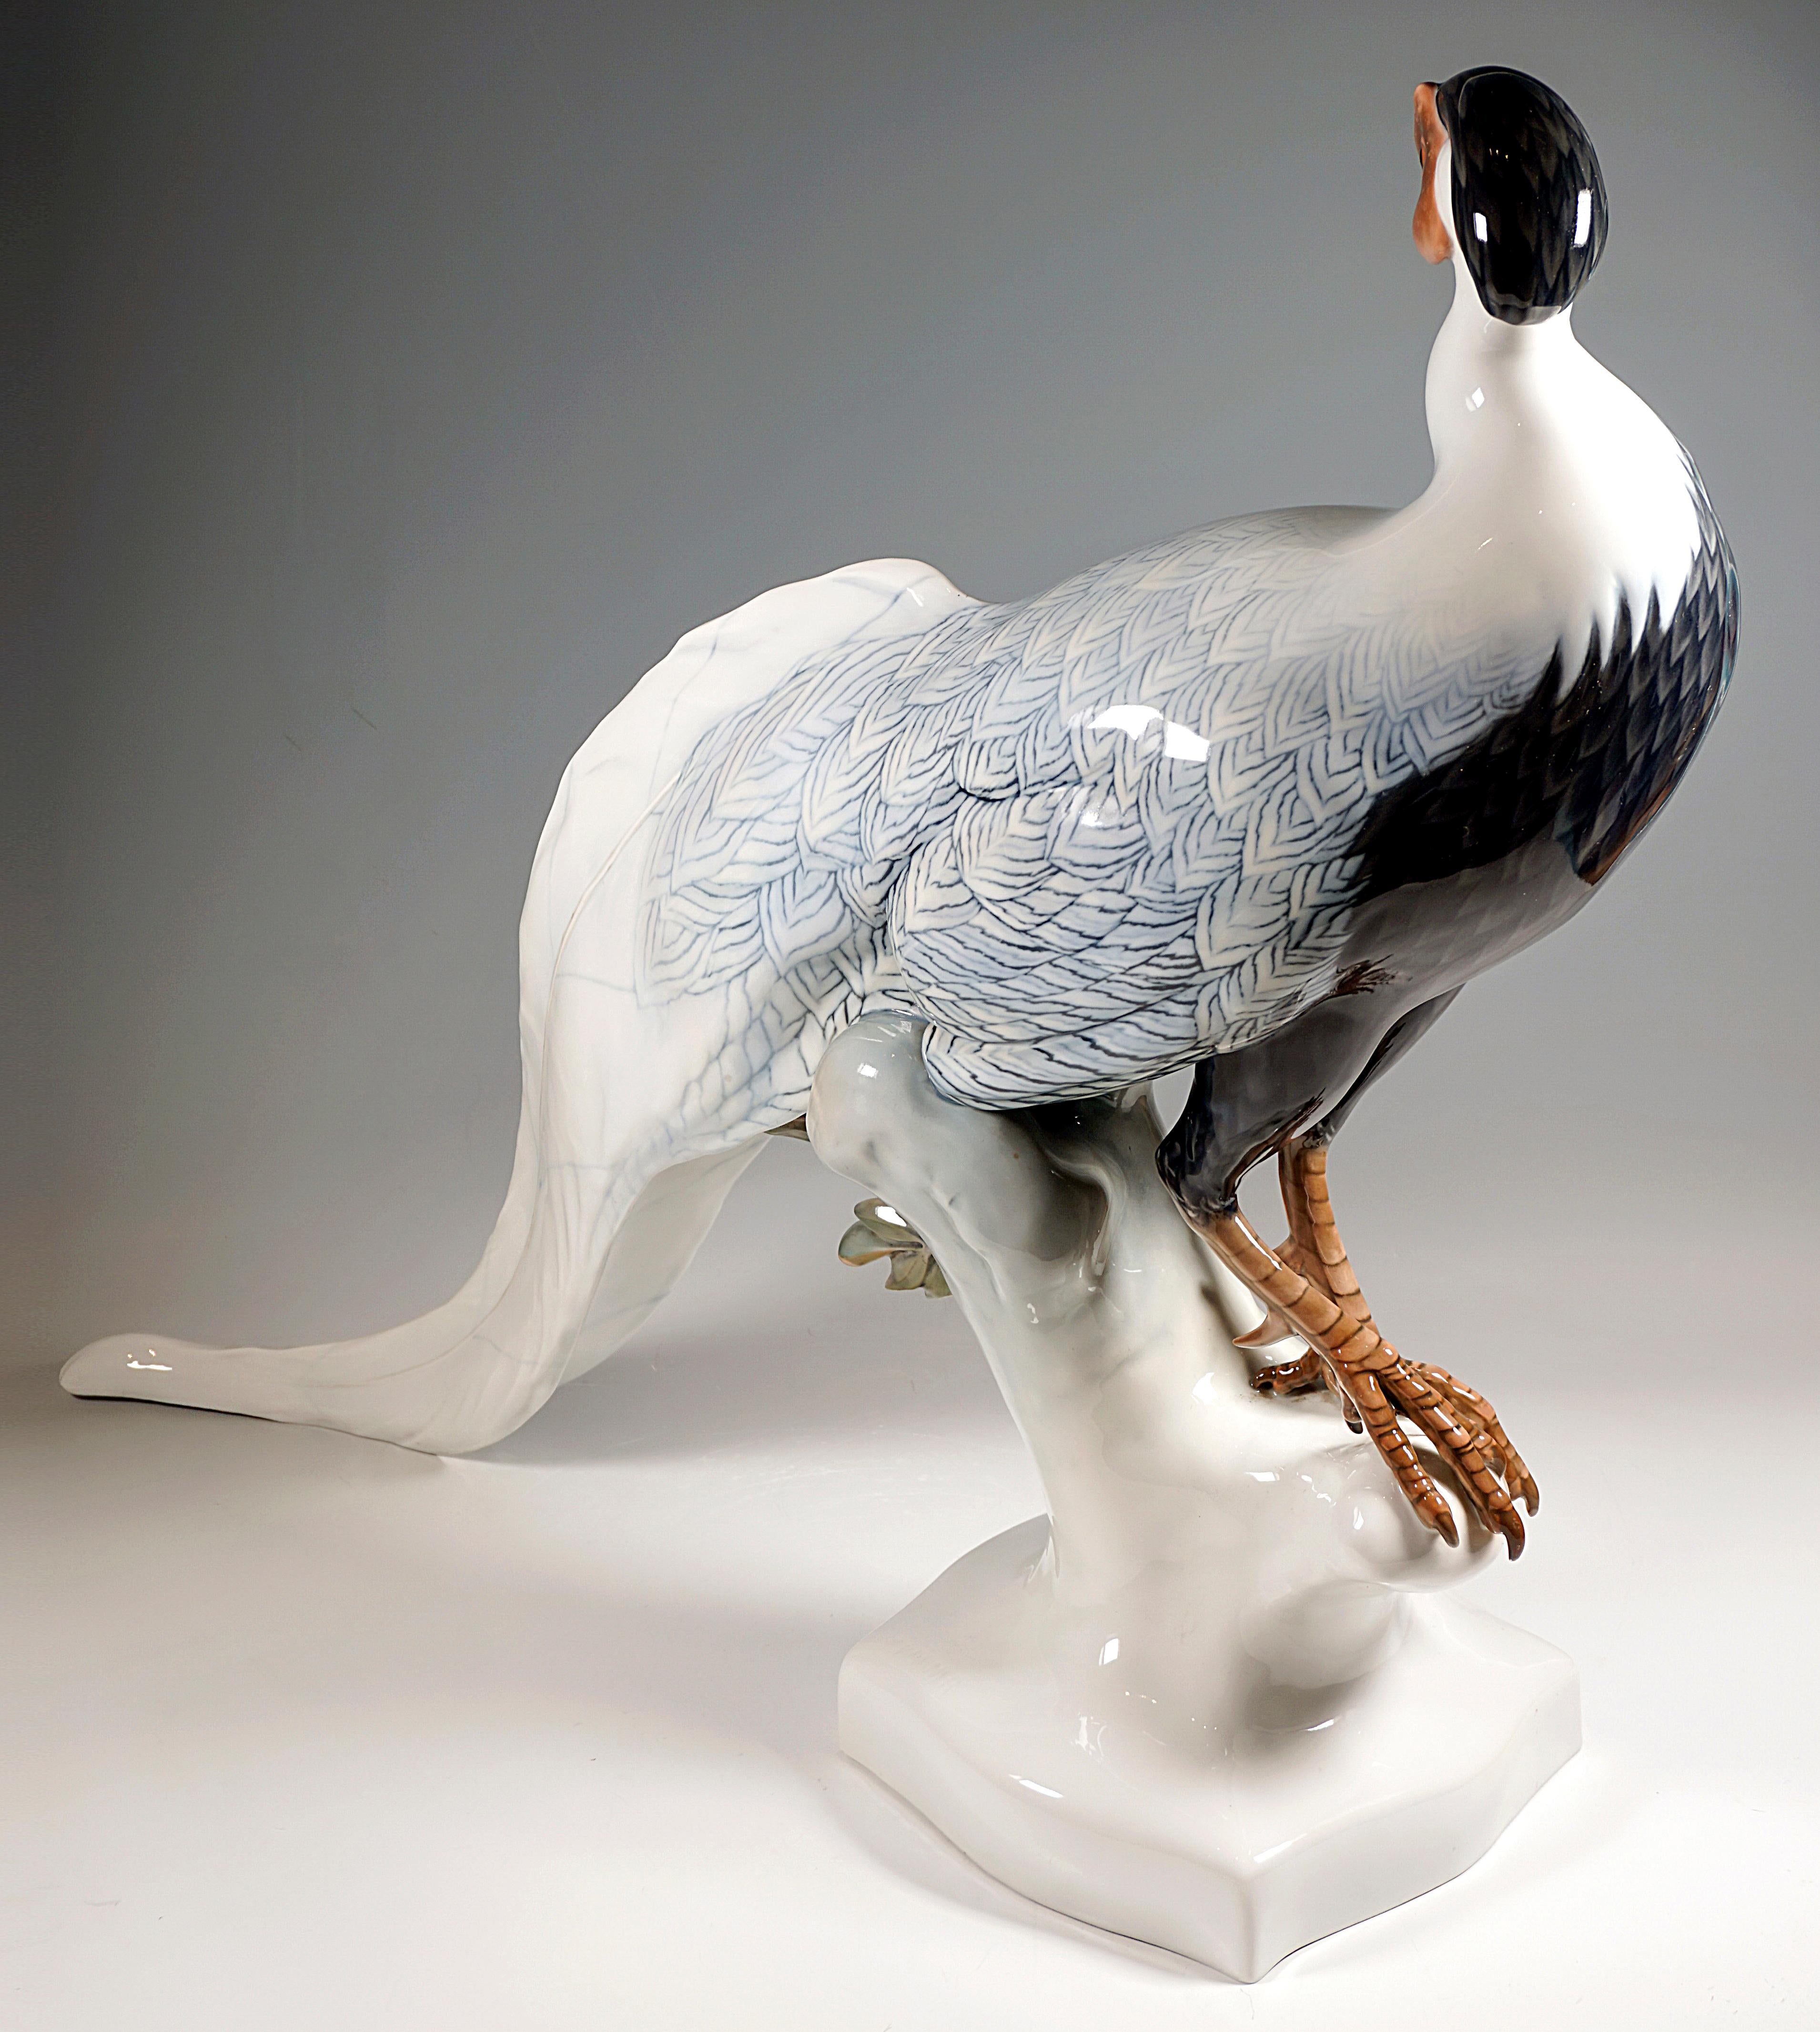 Admirable Art Déco Figurine by Rosenthal:
Large depiction of a silver pheasant sitting on a leafy branch with sparse polychrome painting, blue-grey plumage, head turned backwards.
On an irregular natural base, artist's signature 'KÄRNER' on the